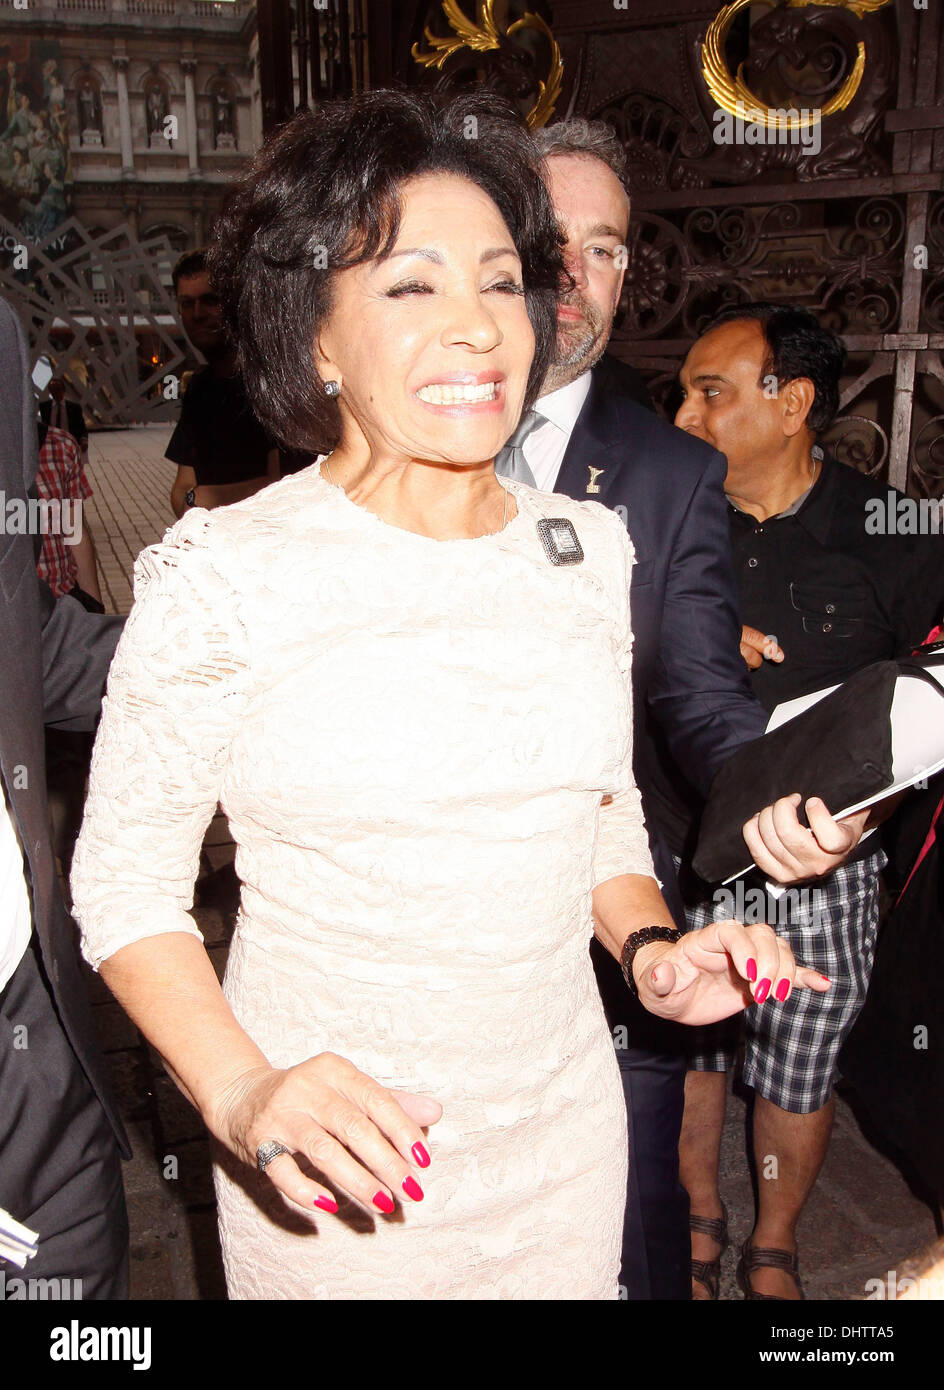 Shirley Bassey 'A Celebration of the Arts' held at the Royal Academy of Arts - Outside London, England - 23.05.12 ***Not Available for Publication in the Daily Express, Daily Star and Evening Standard. Available for Publication in the Rest of the World*** Credit Mandatory: Cameron Clegg/WENN.com Stock Photo